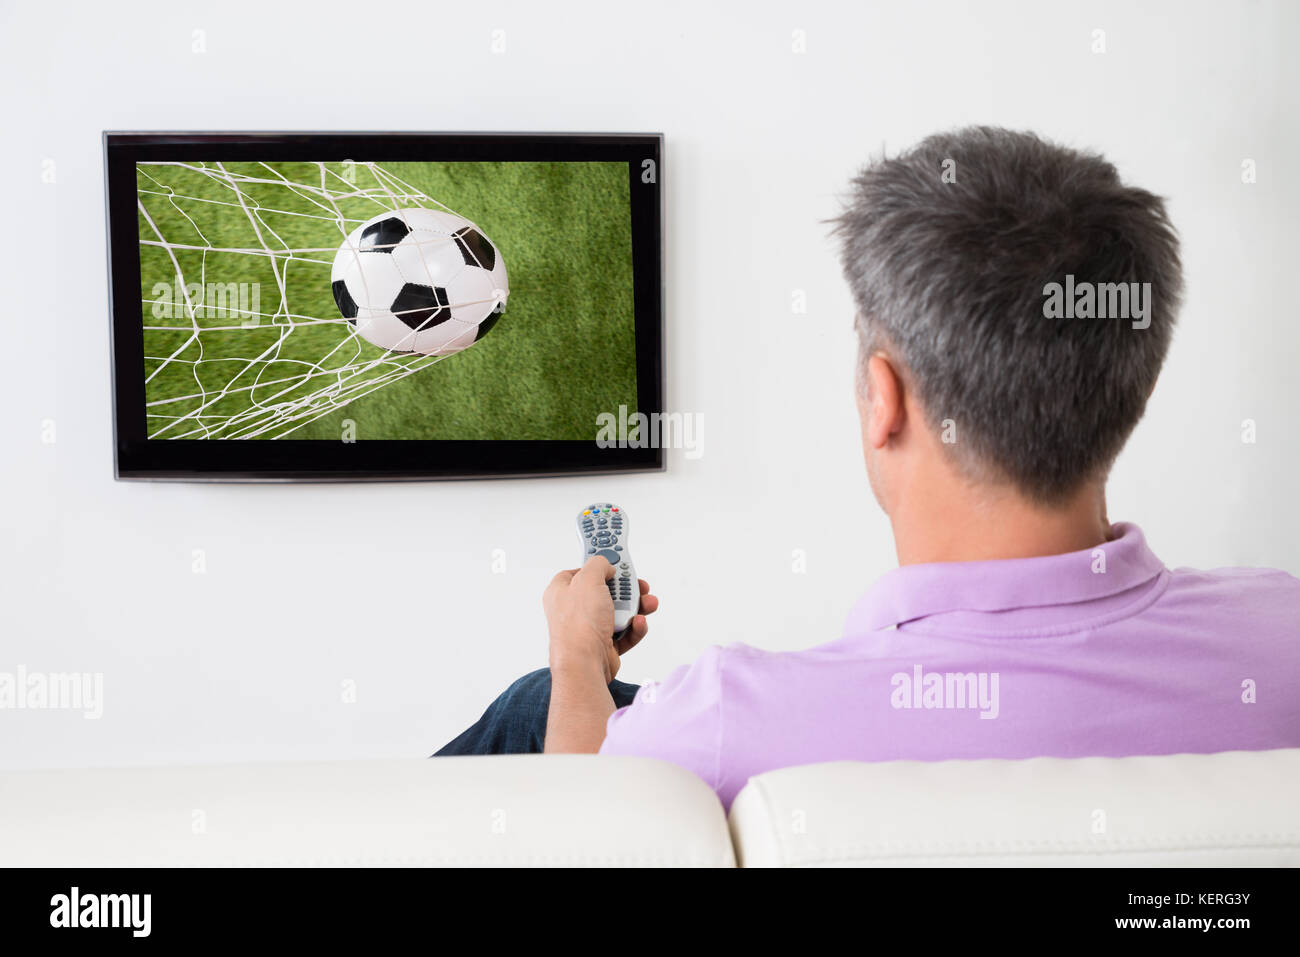 Tv screen football stock photography images - Alamy